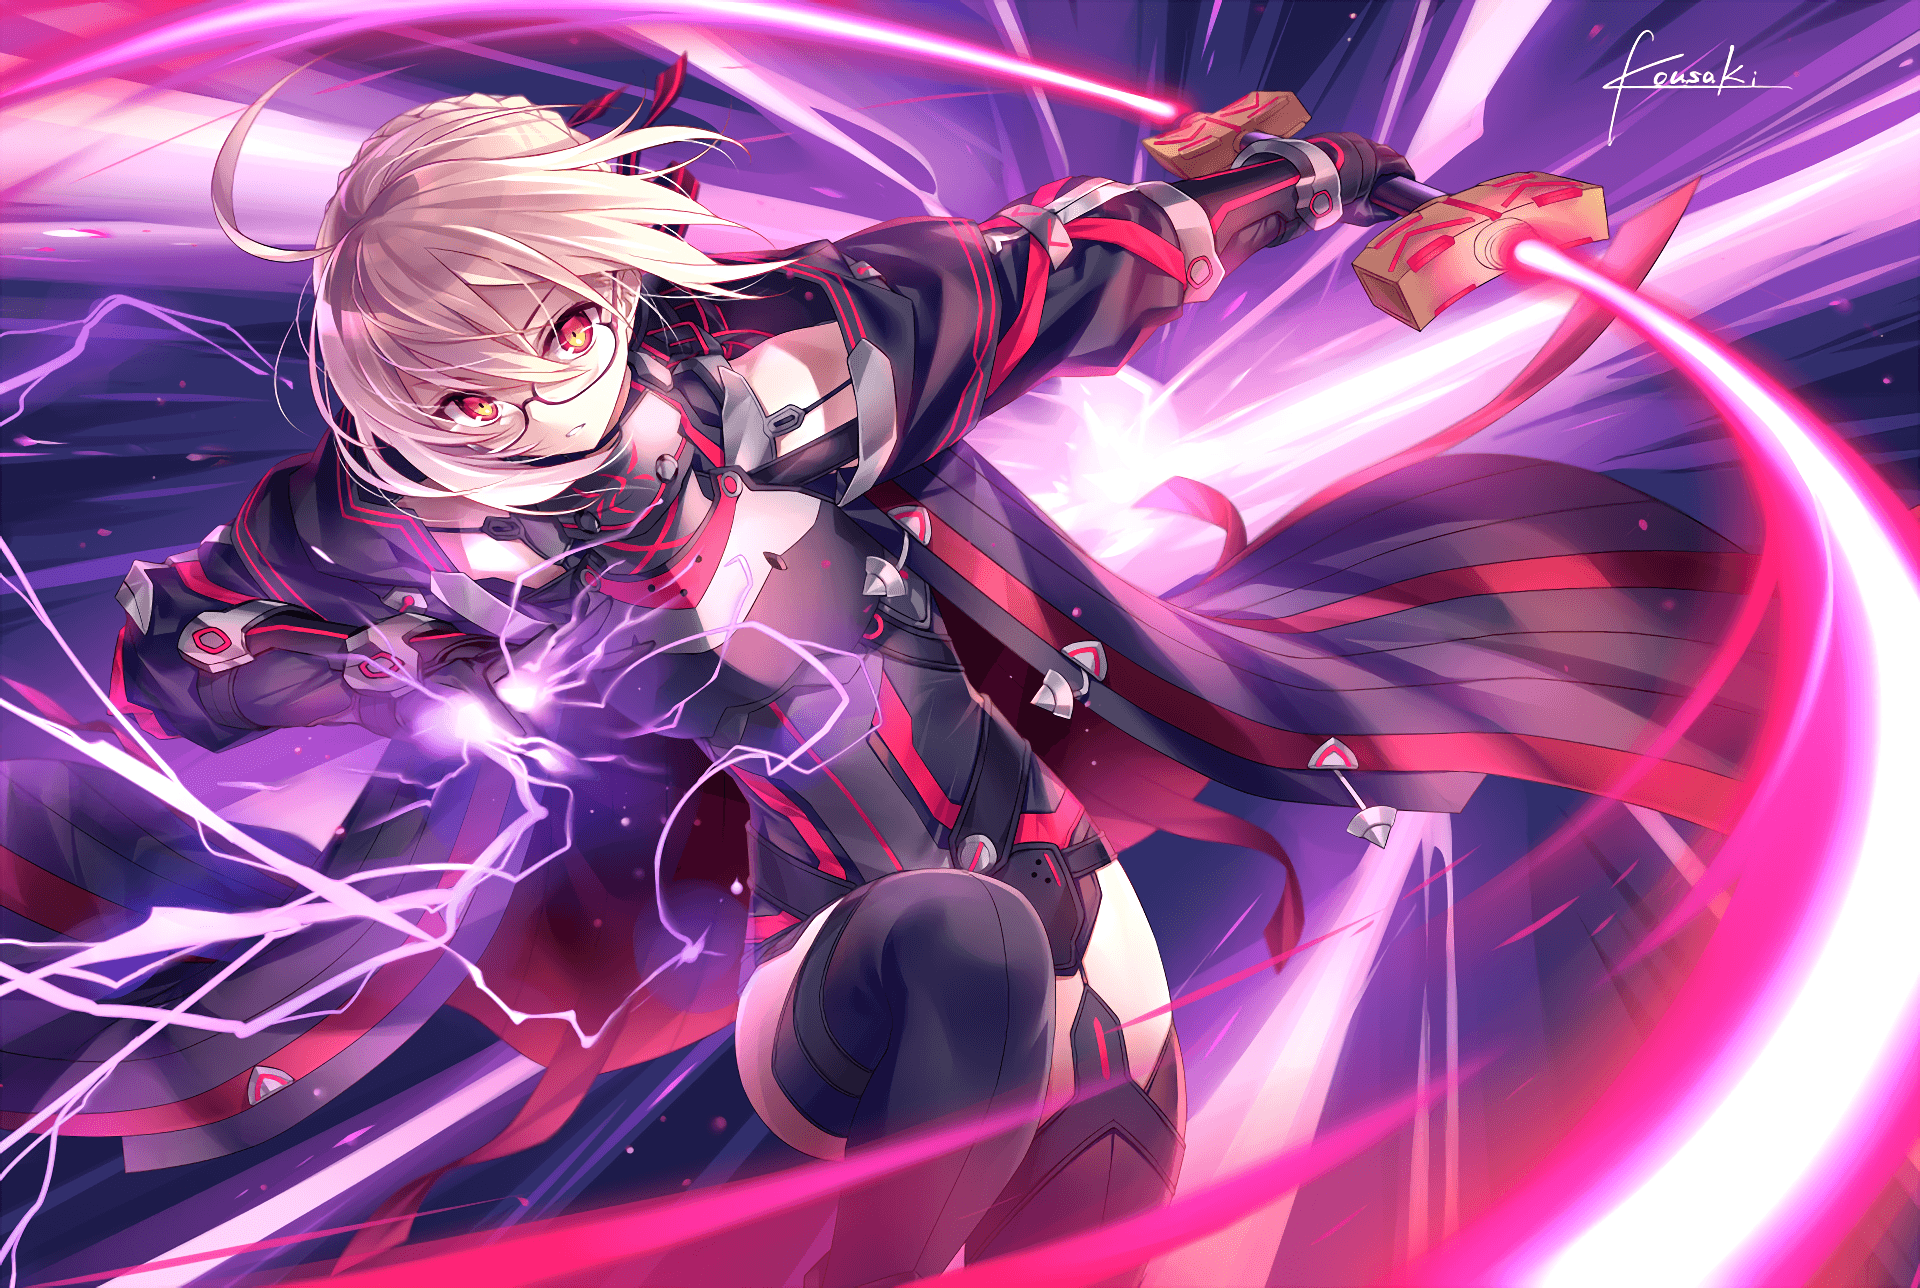 Anime Fate/Grand Order HD Wallpaper by わだかず